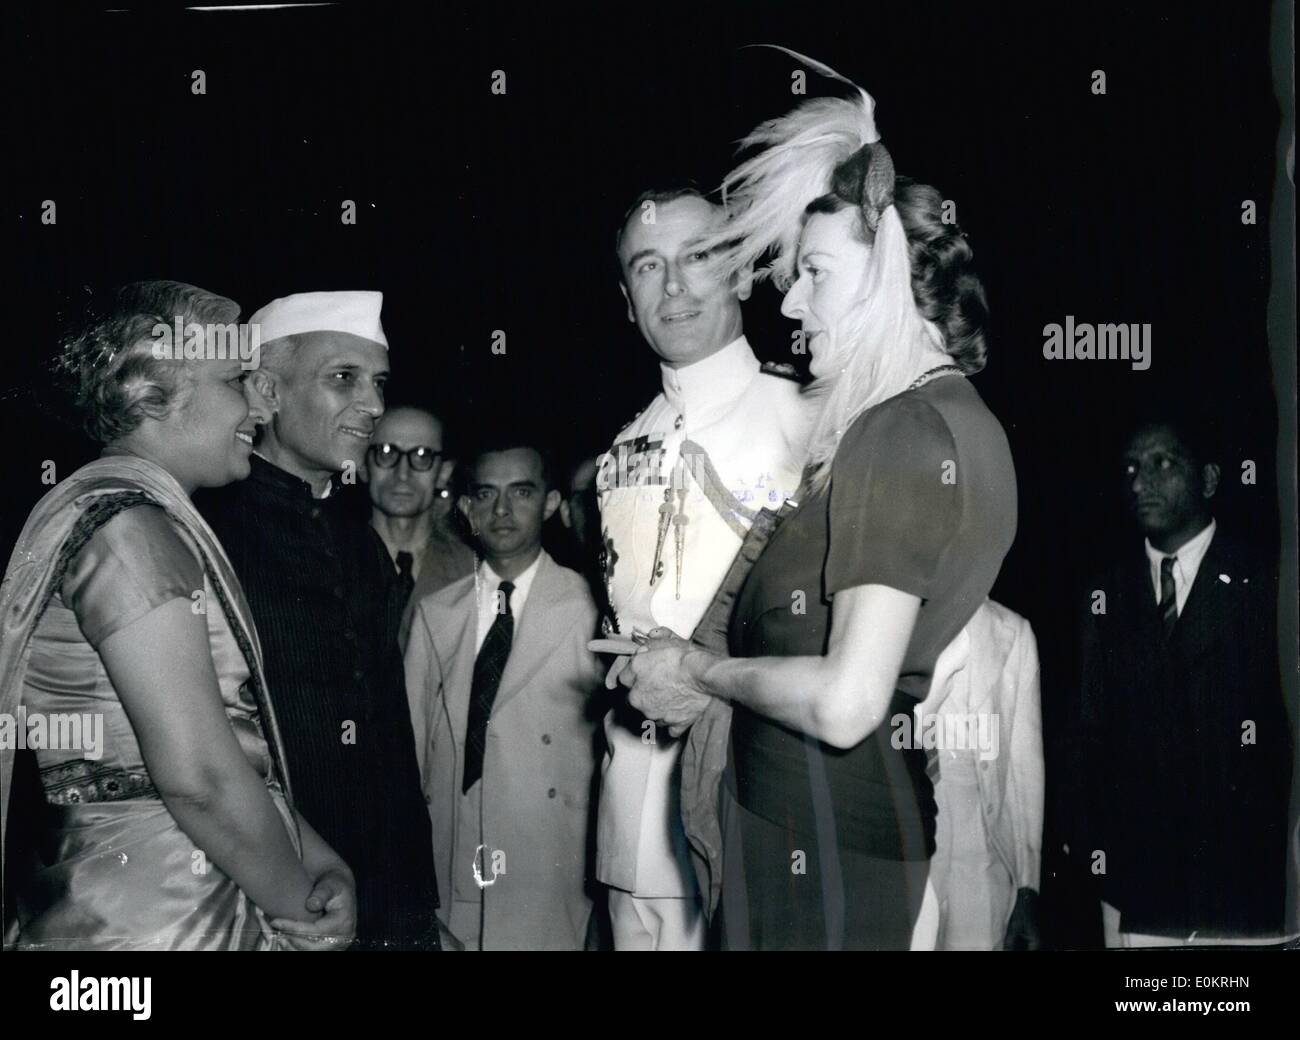 Apr. 04, 1947 - New Indian viceroy gives Reception to delegates : The new viceroy of India, lord Louis Mountbatten, accompanied Stock Photo